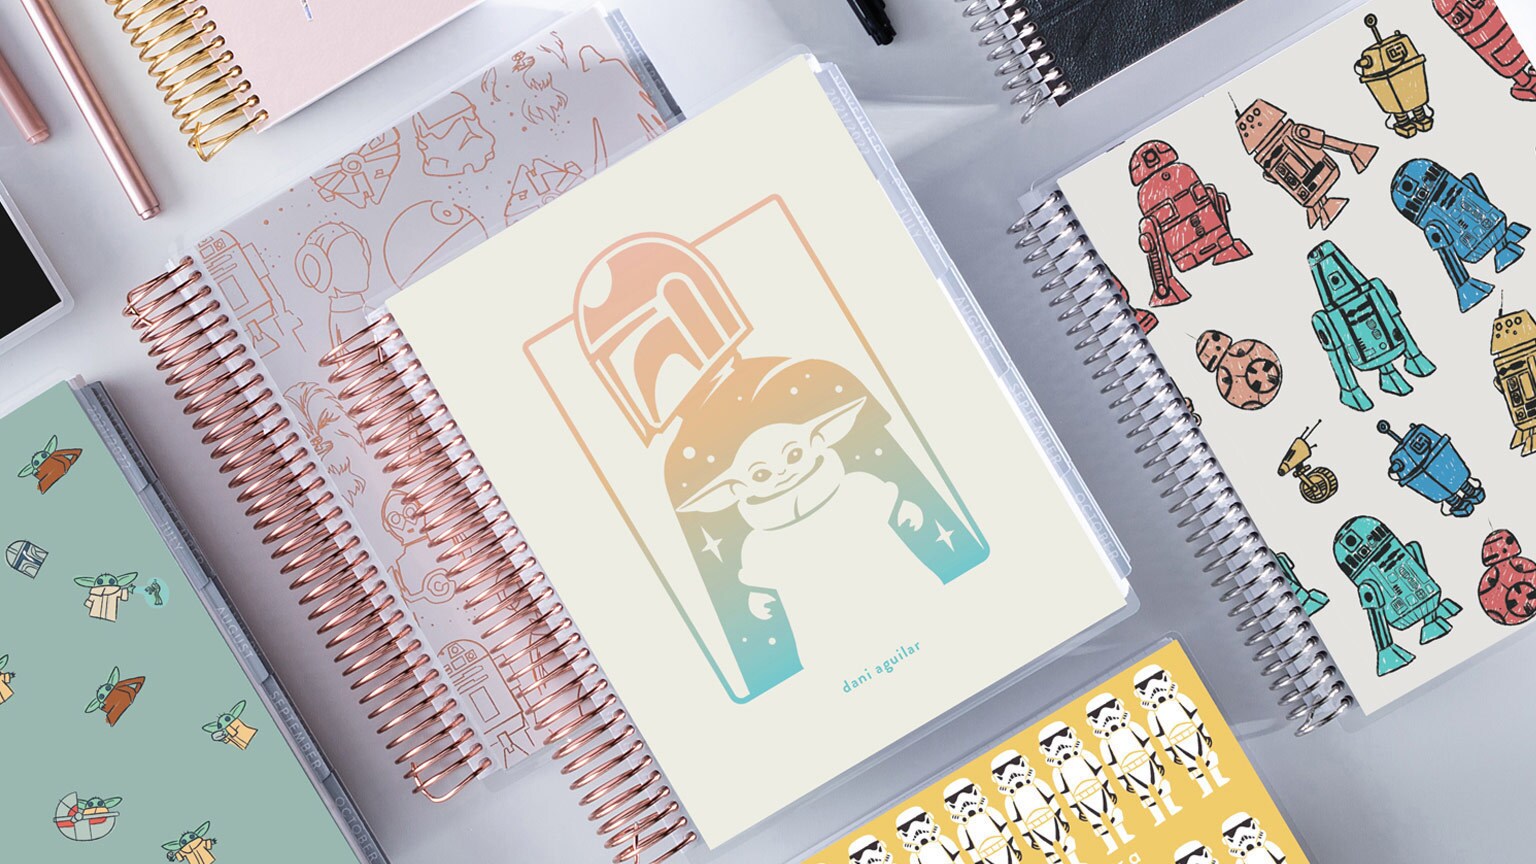 How the Erin Condren Star Wars Collection Brings Galactic Style to Everyday Essentials